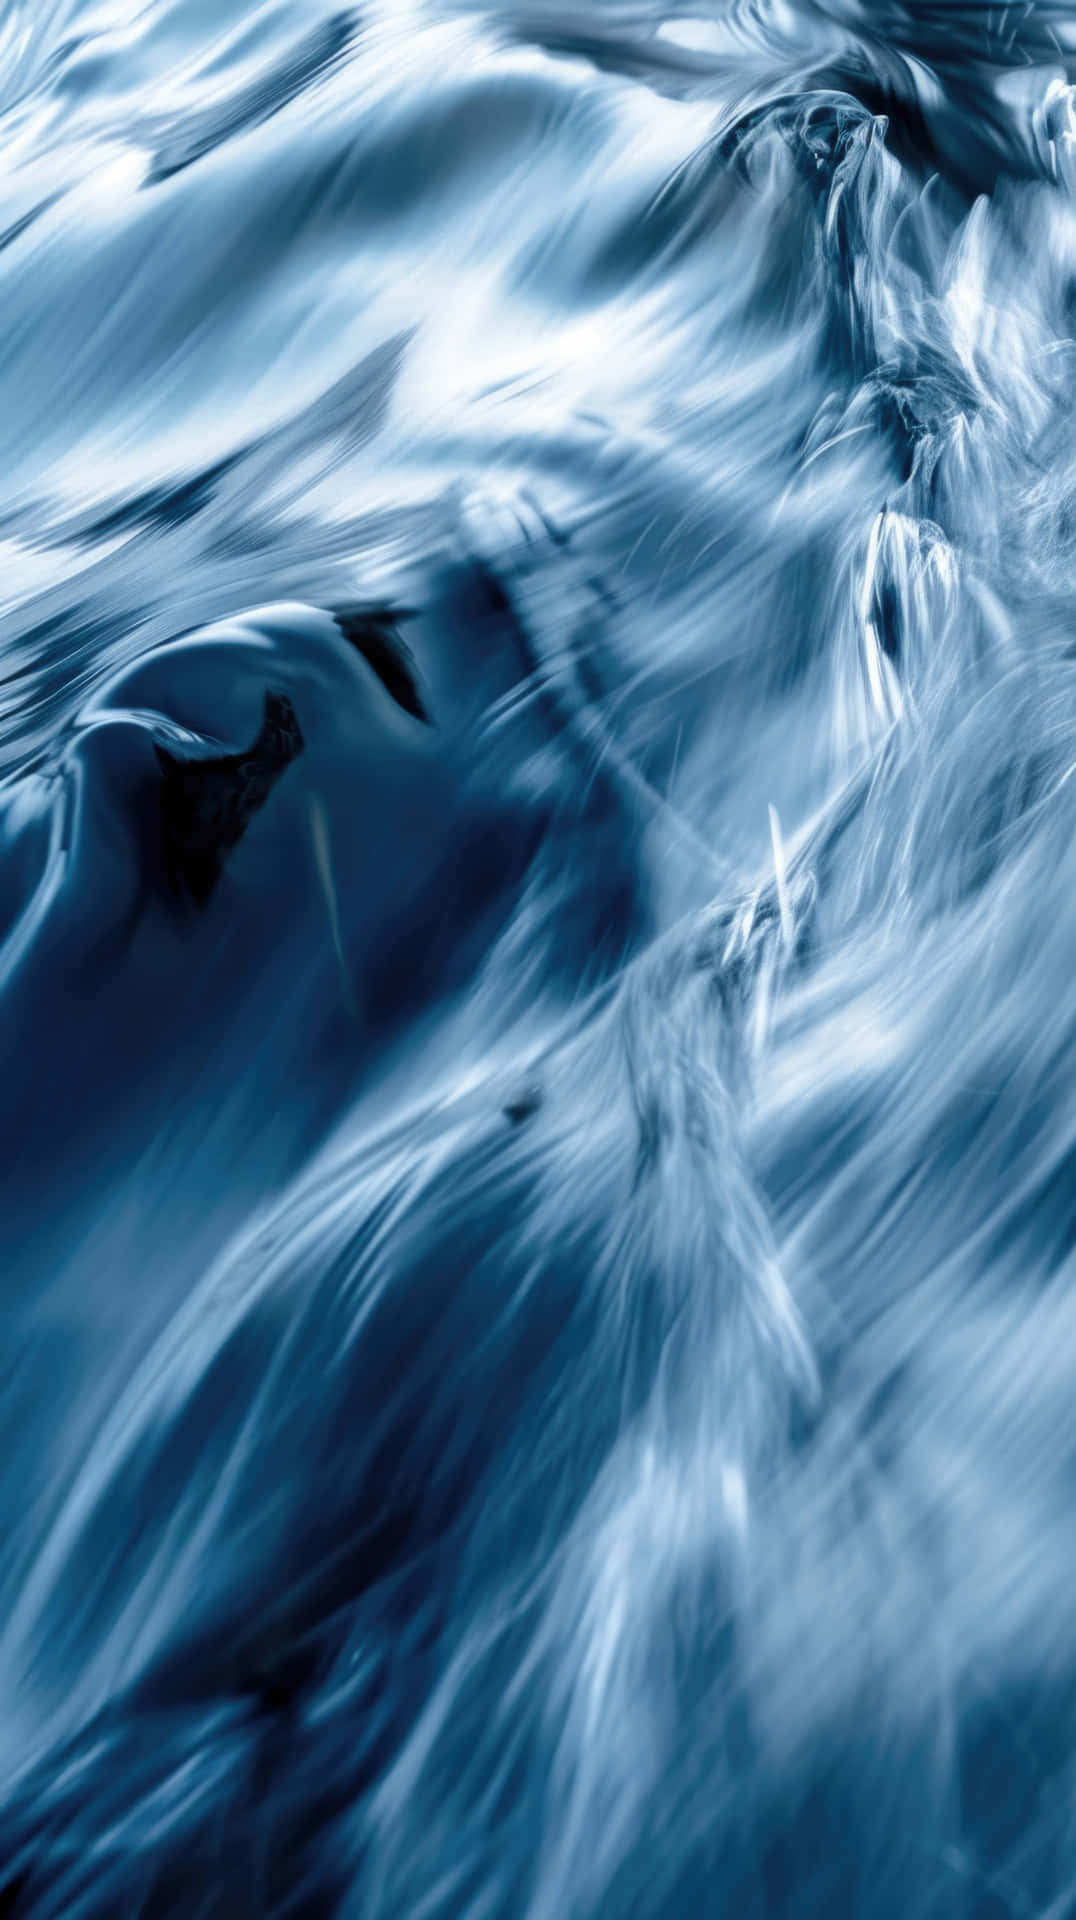 Abstract Blue Water Textures Wallpaper